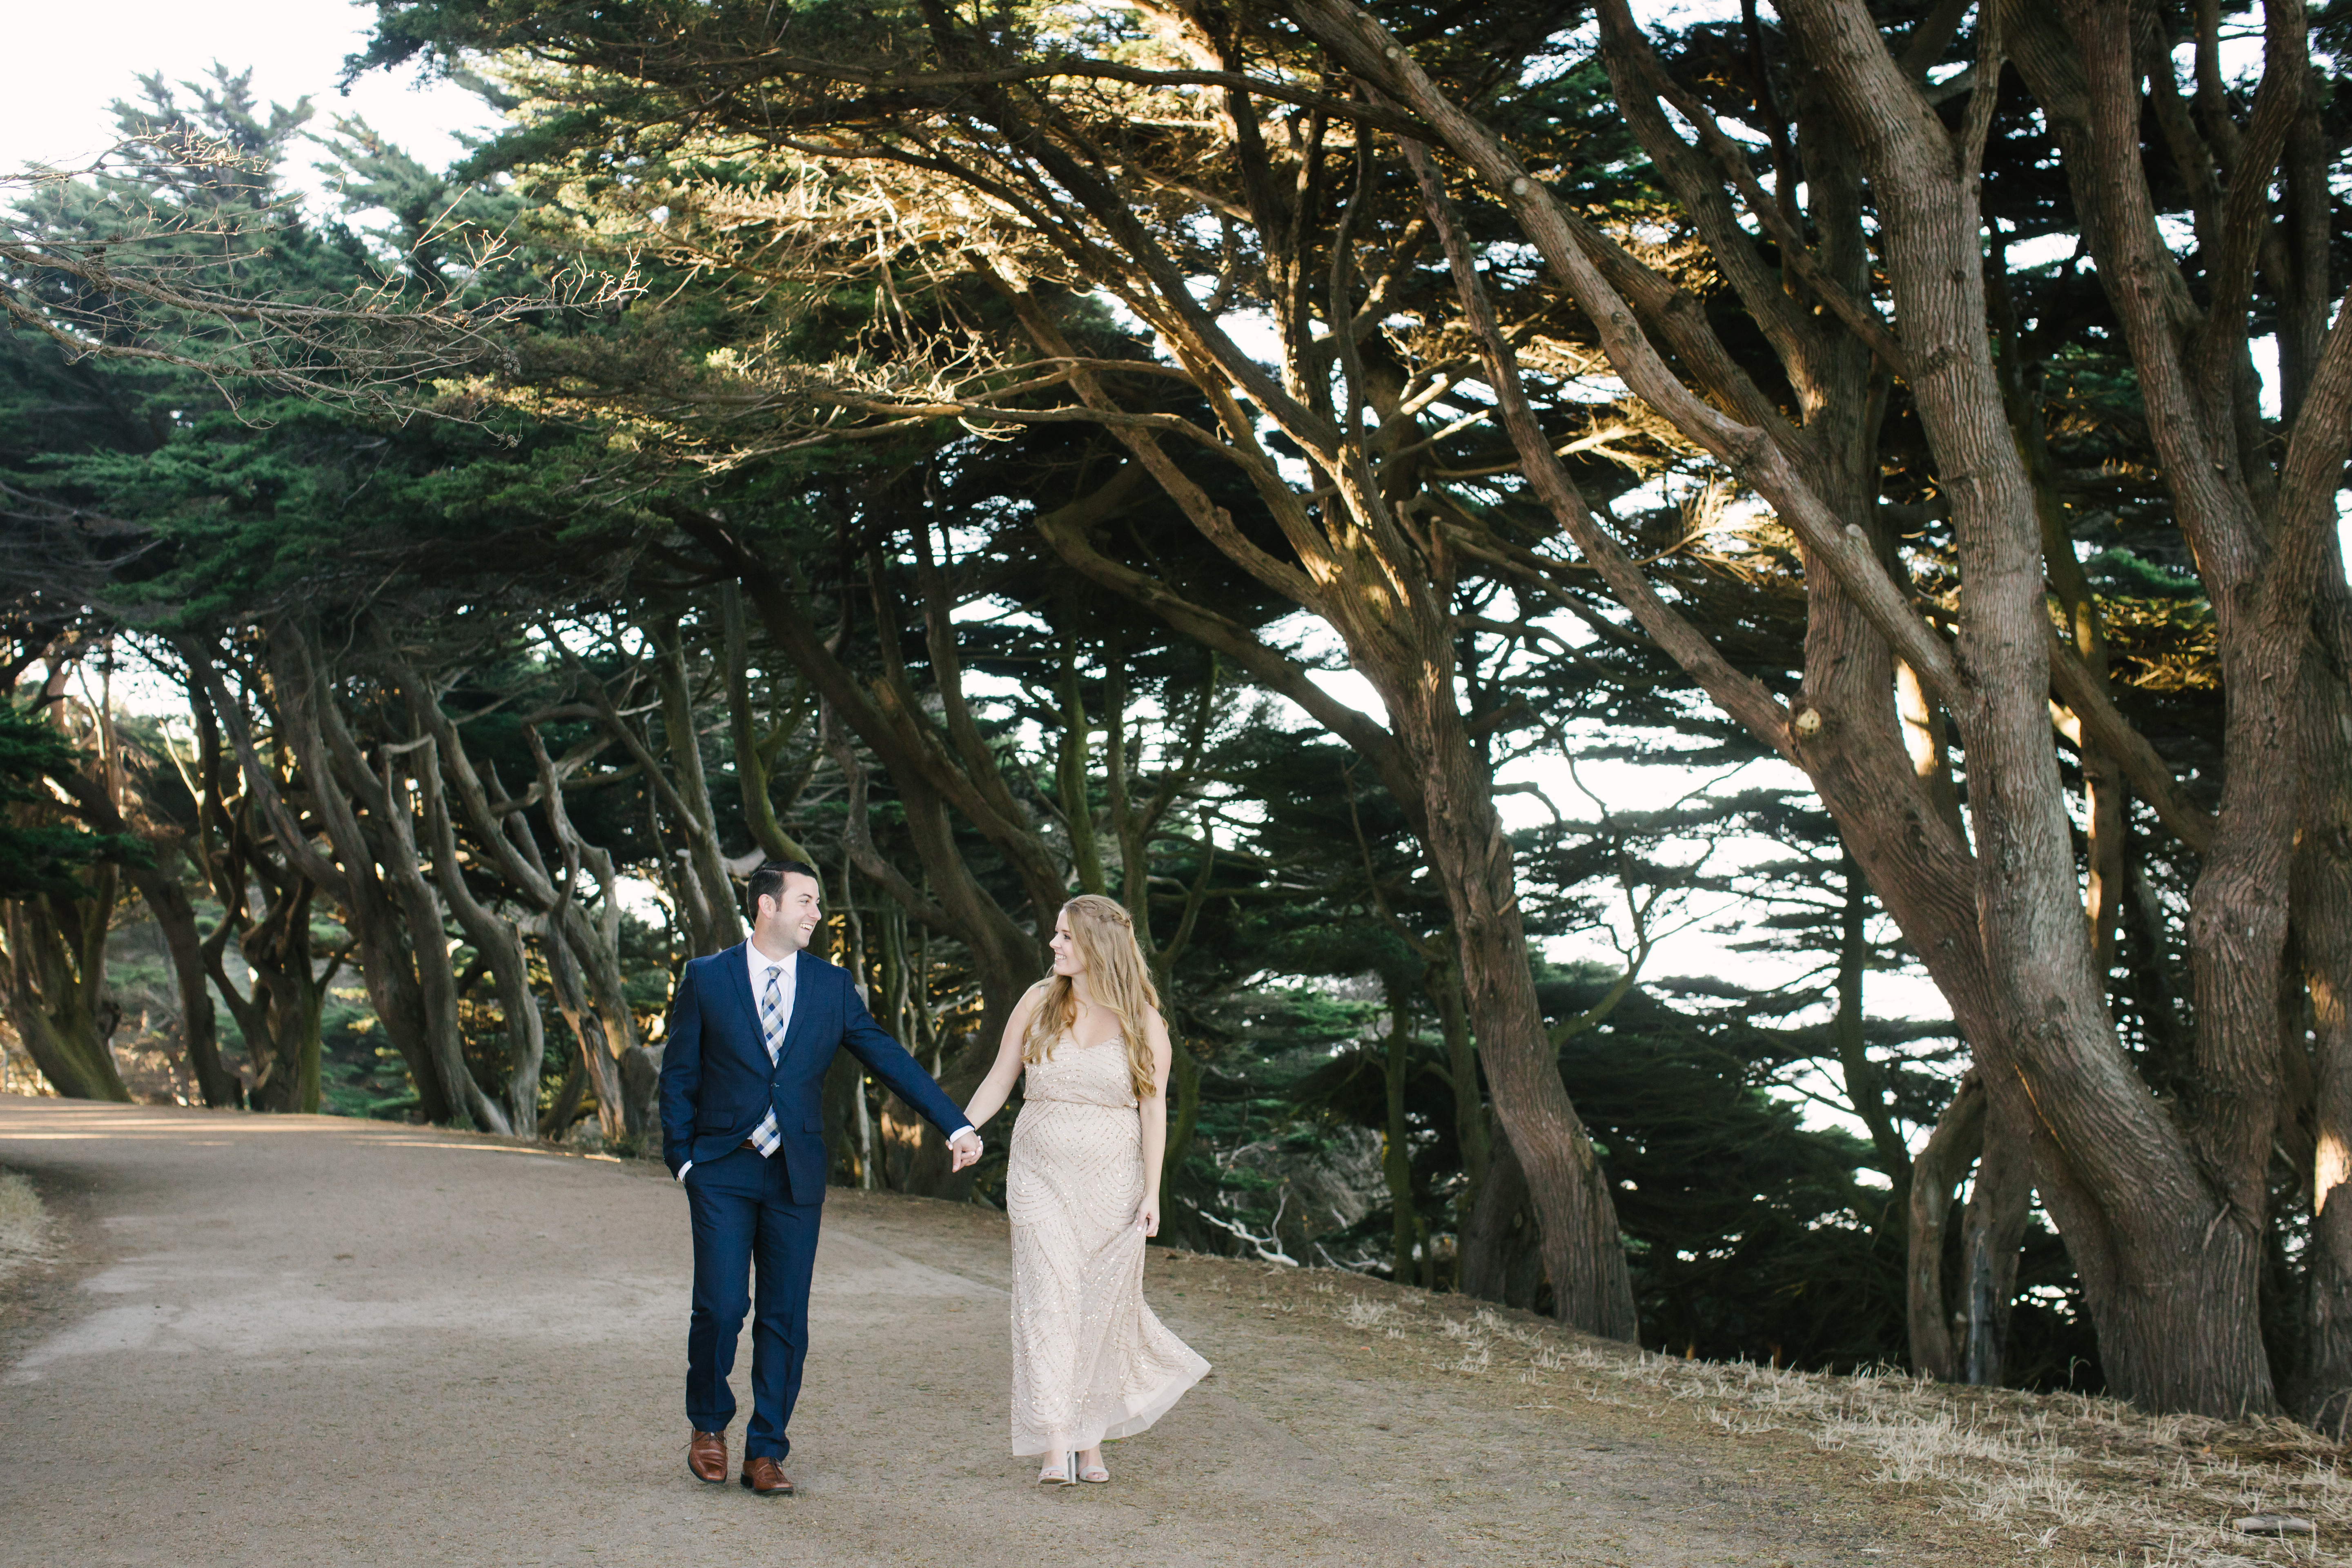 Jessica Rice Photography- San Fransisco Engagement at Sutro Baths and Lands End